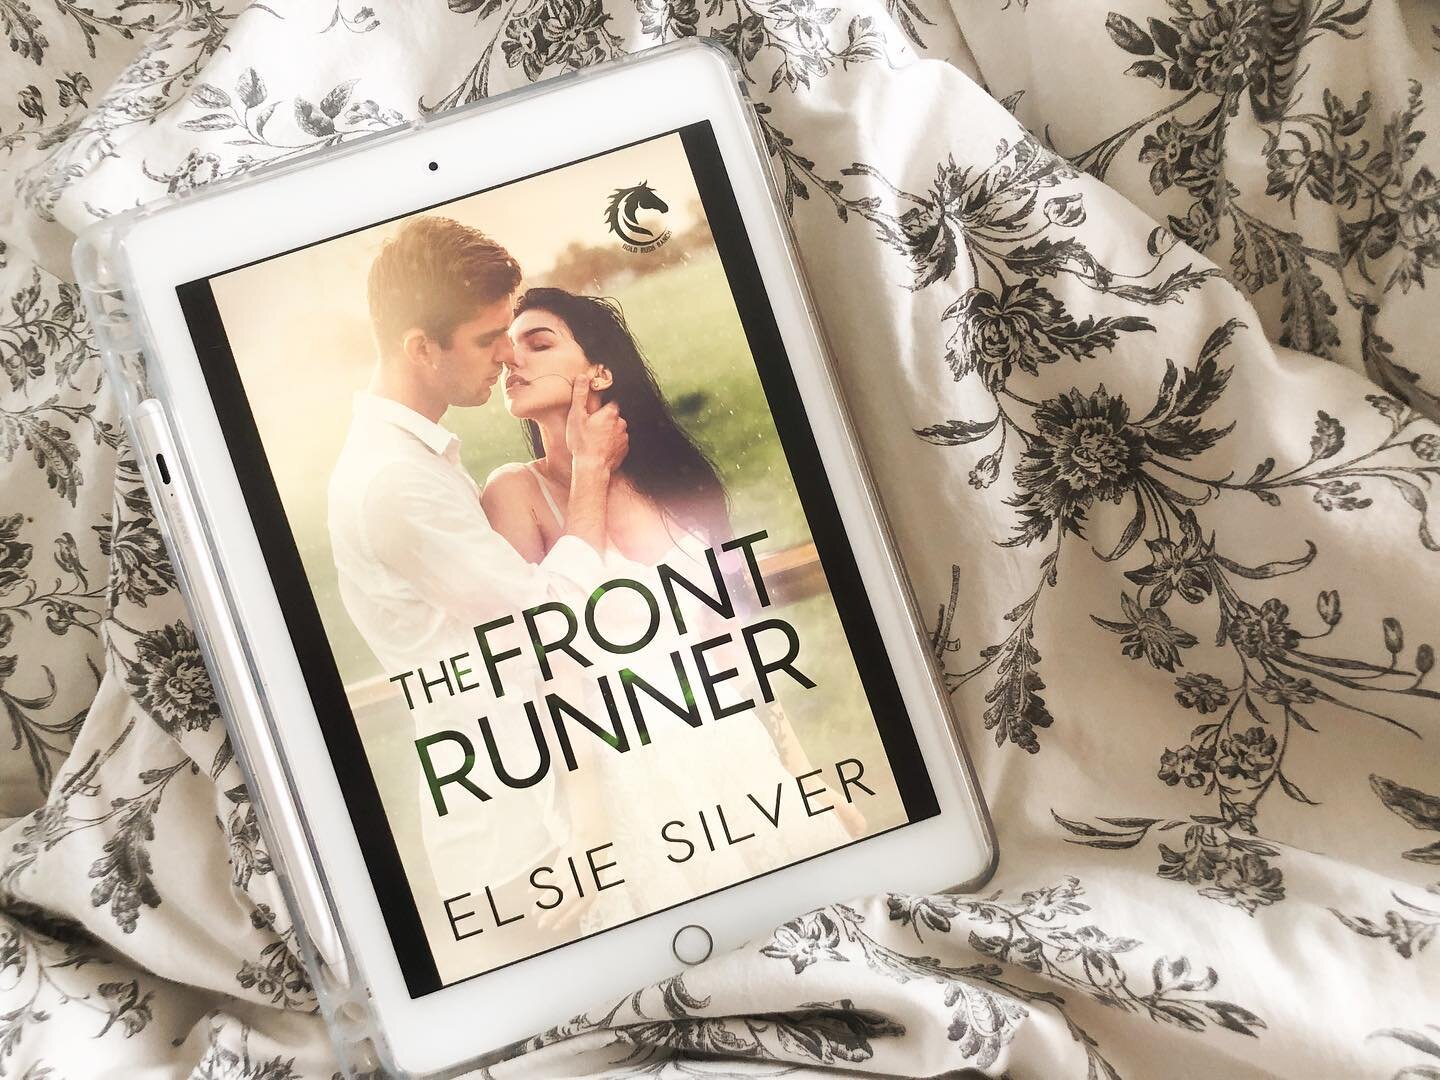 ✨ BOOK REVIEW ✨ 

📖 | 𝐭𝐡𝐞 𝐟𝐫𝐨𝐧𝐭 𝐫𝐮𝐧𝐧𝐞𝐫
📝 | elsie silver &middot; @authorelsiesilver 
📅 | december 3, 2021
📚 | gold rush ranch, book #3

rating : ⭐️⭐️⭐️⭐️
spice : 🌶️🌶️🌶️

👍🏼 | It&rsquo;s been a pleasant read and I thoroughly enj